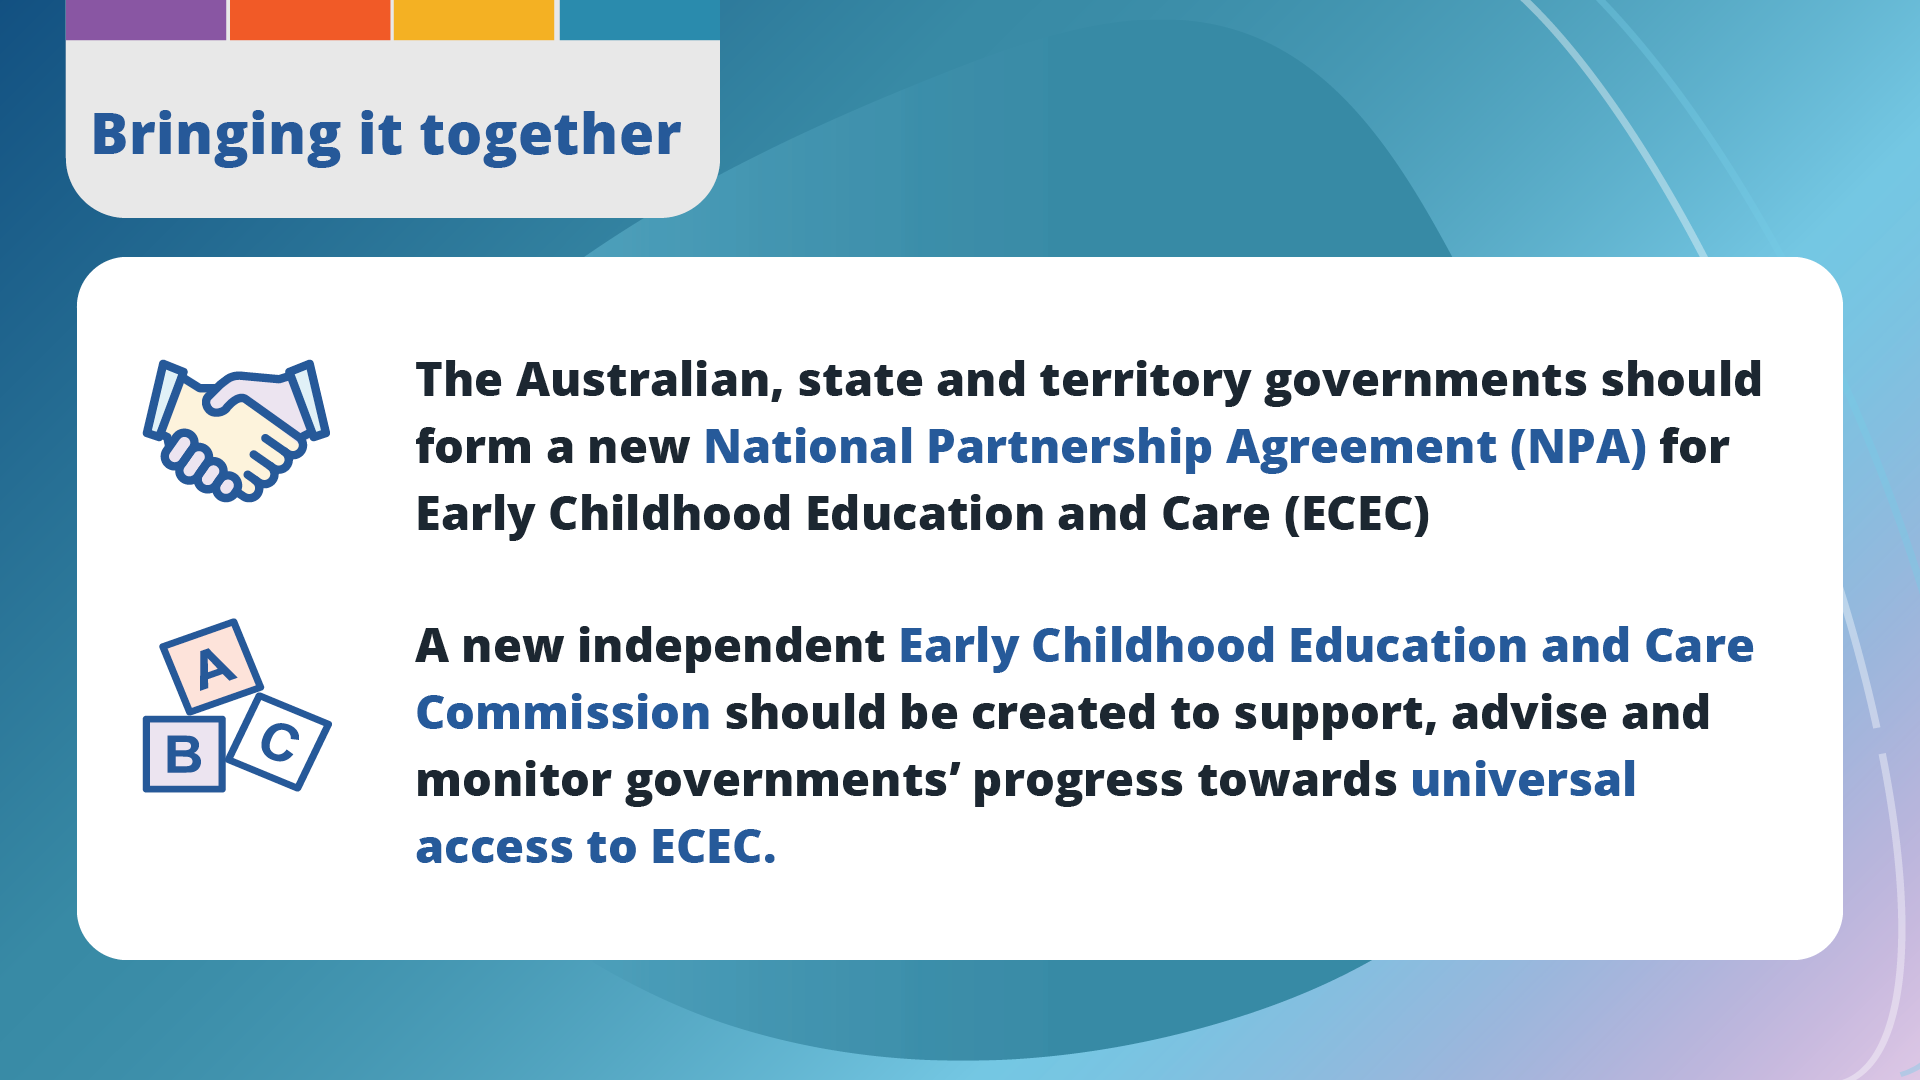 Bringing it together. The Australian, state and territory governments should form a new National Partnership Agreement (NPA) for Early Childhood Education and Care (ECEC). A new independent Early Childhood Education and Care Commission should be created to support, advise and monitor governments’ progress towards universal access to ECEC.